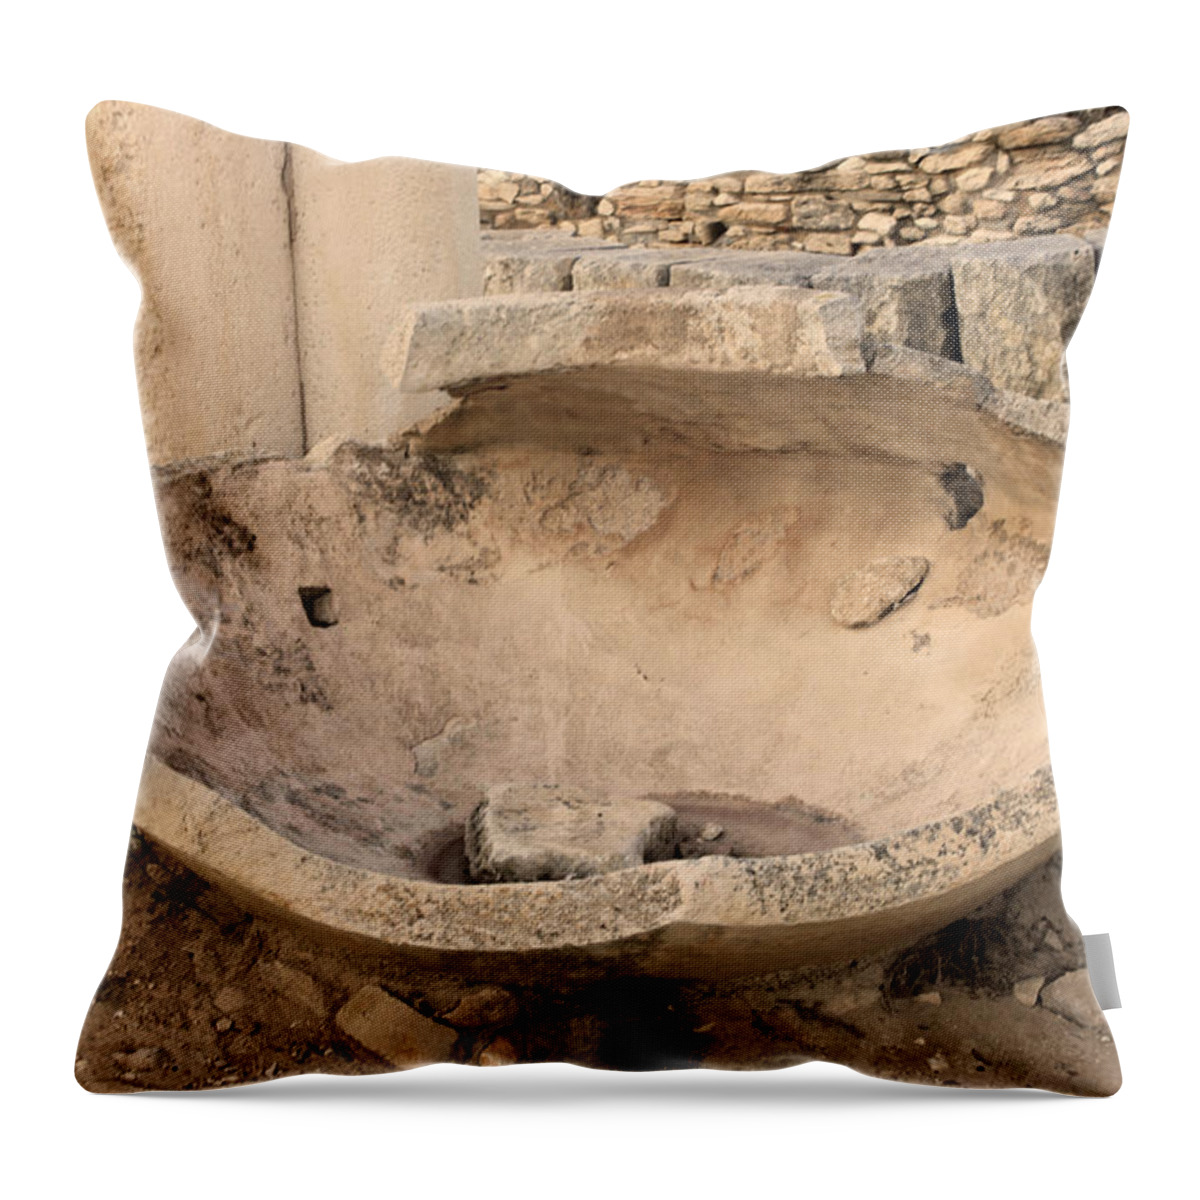 Augusta Stylianou Throw Pillow featuring the photograph Stone Jar at Temple of Apollo by Augusta Stylianou